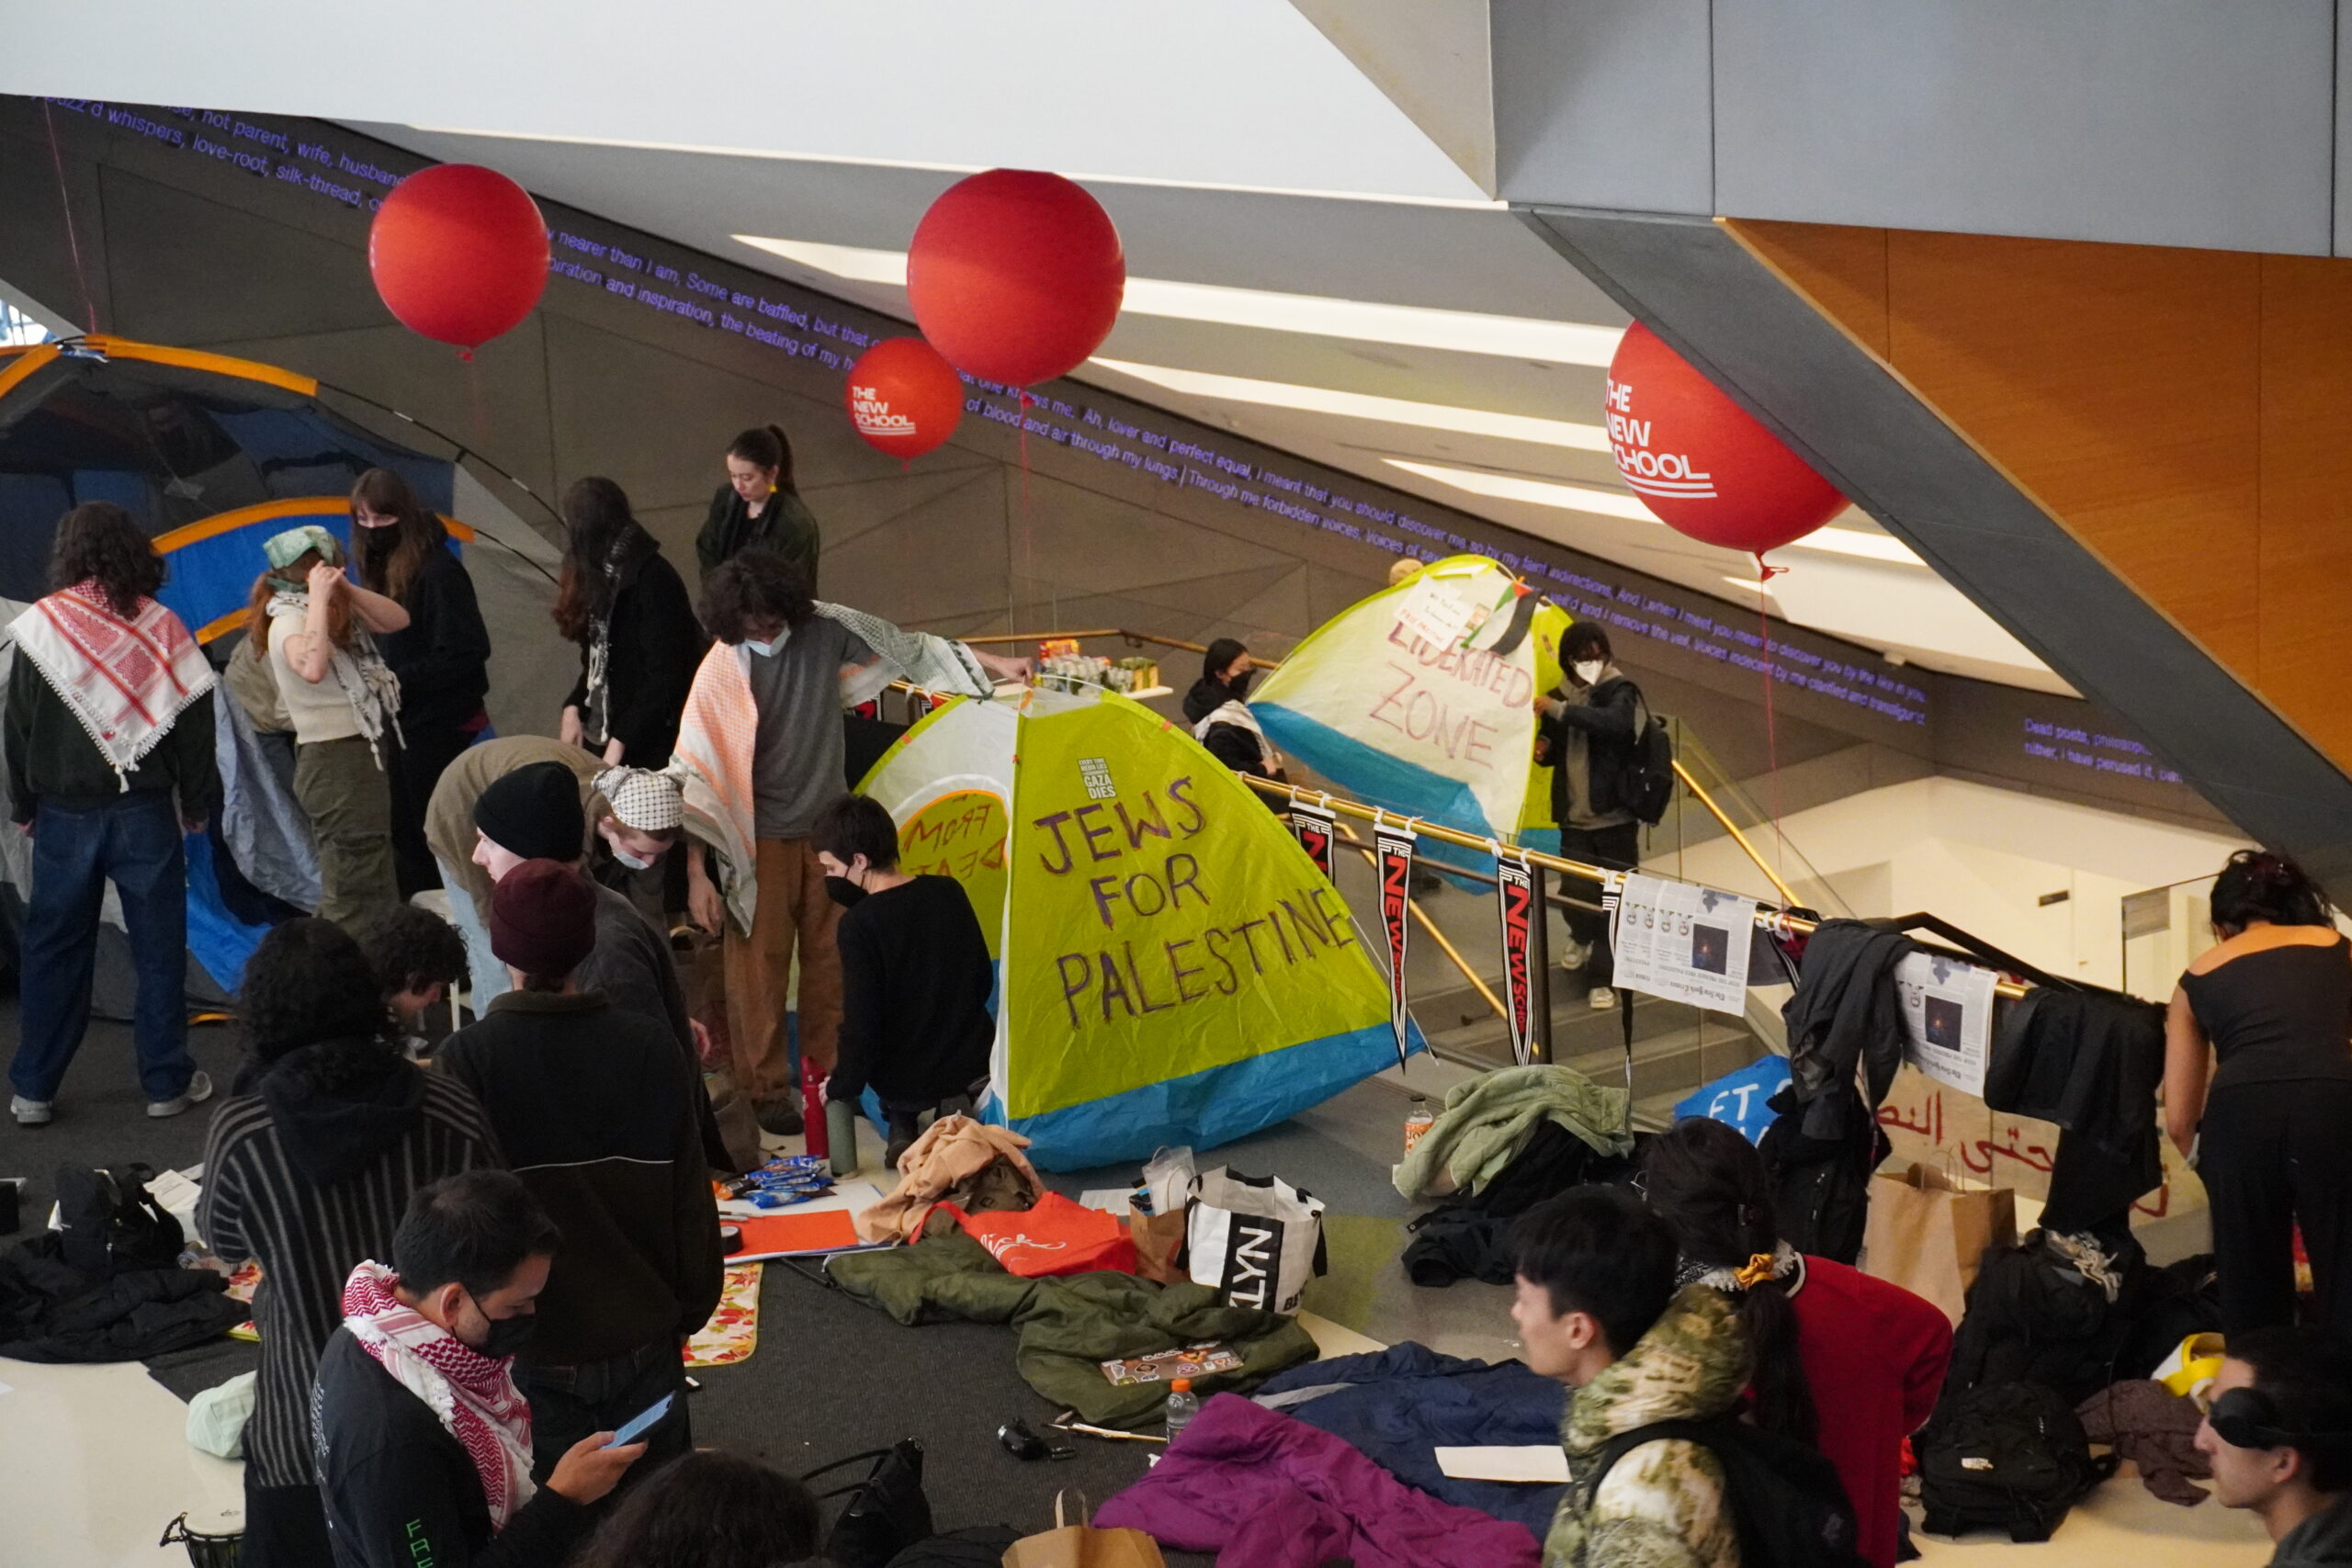 Multiple students walk amongst tents set up in the University Center lobby. In the background are red New School balloons and in the center of the image is a yellow tent that reads “Jews for Palestine.”